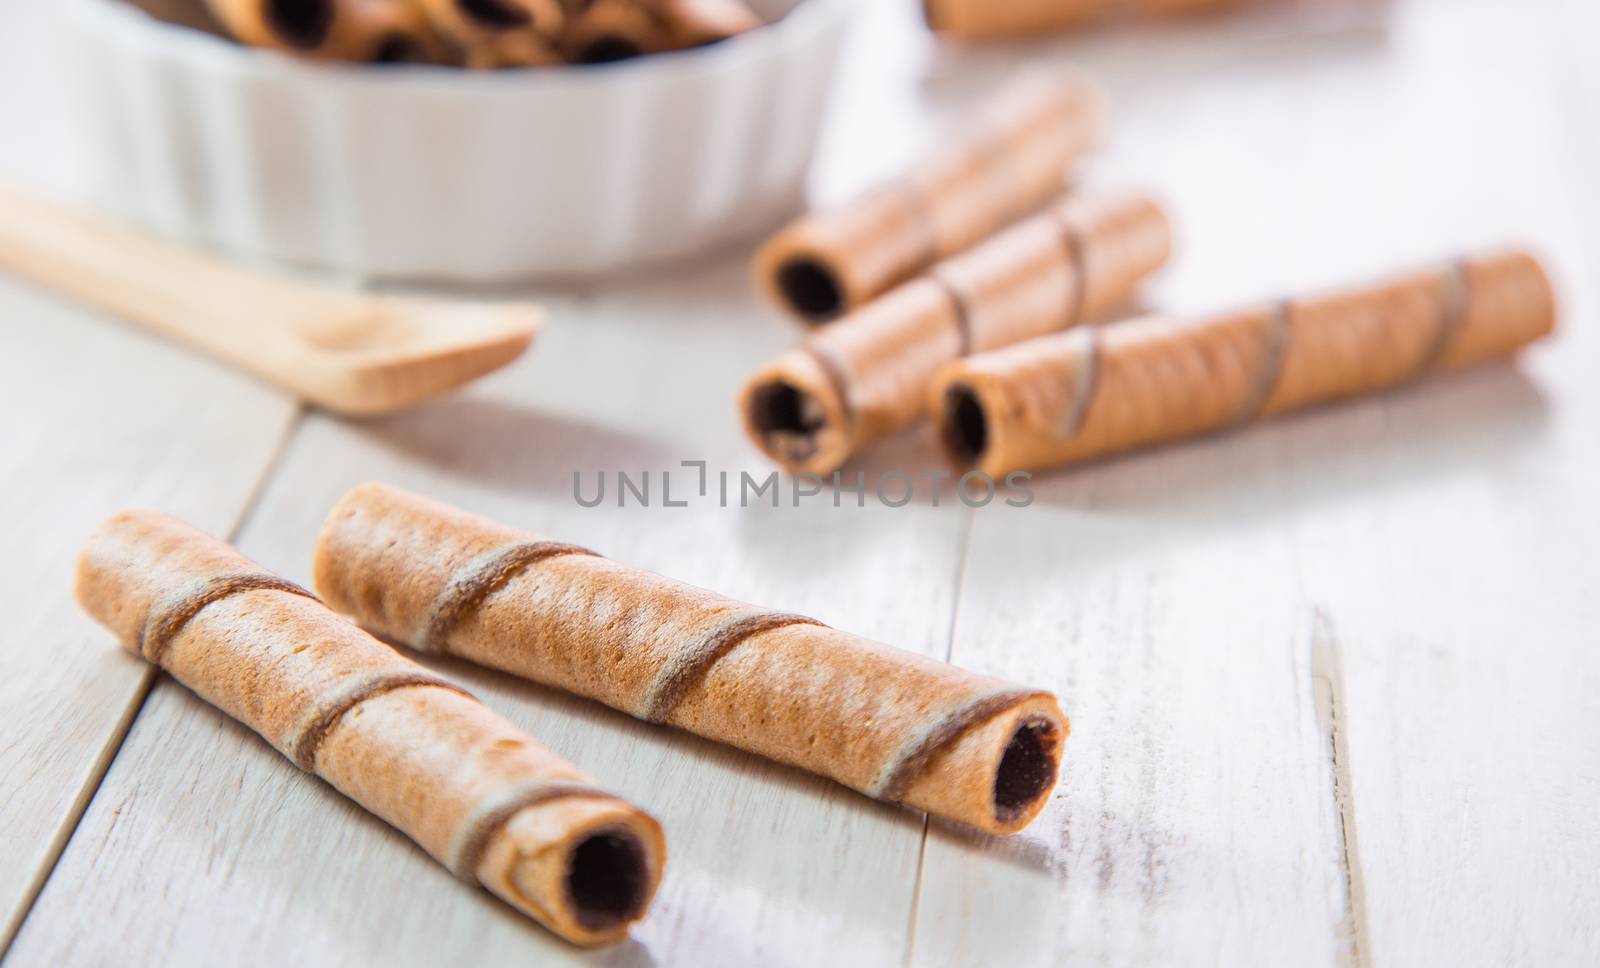 Chocolate wafer roll on wooden table